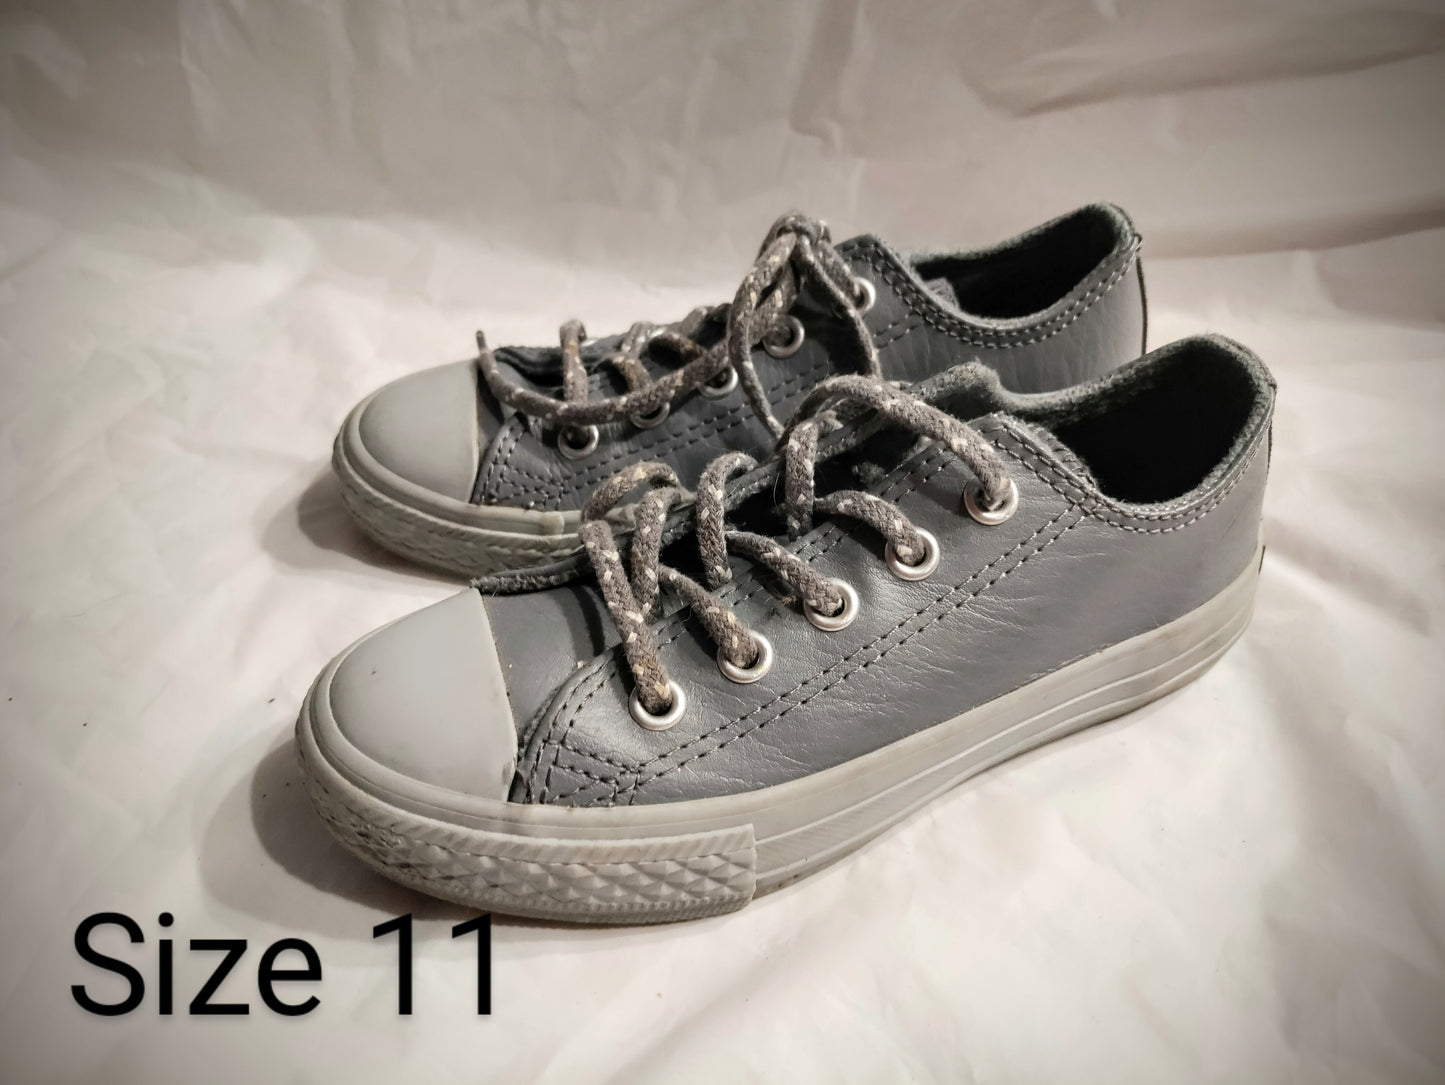 Converse, gray leather boys or girls size 11c. EUC